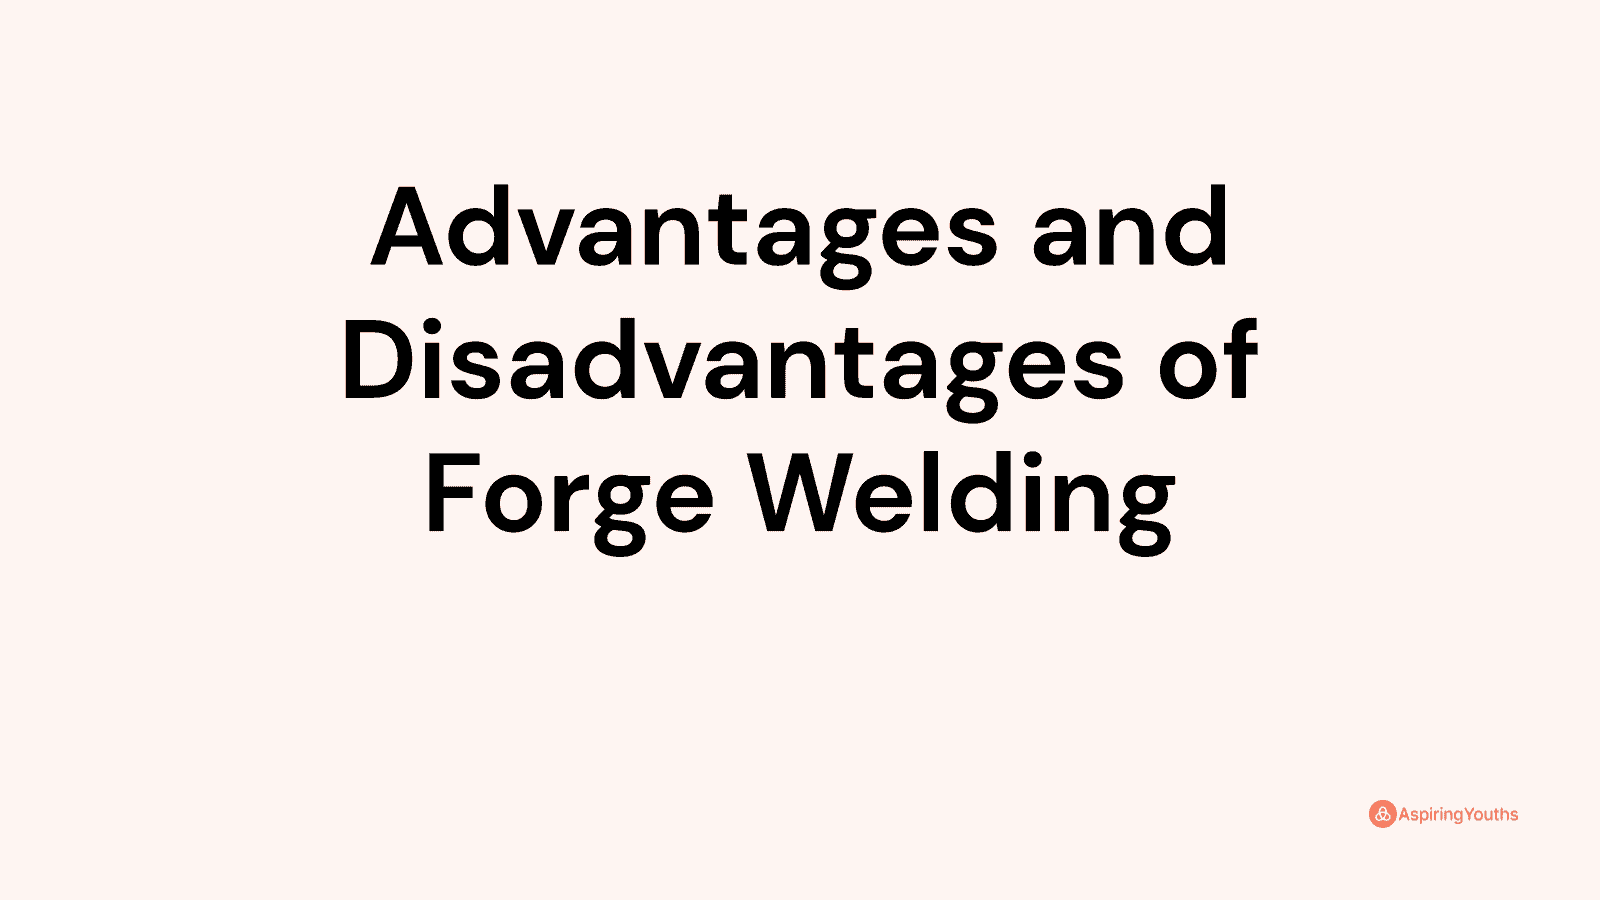 Advantages and disadvantages of Forge Welding